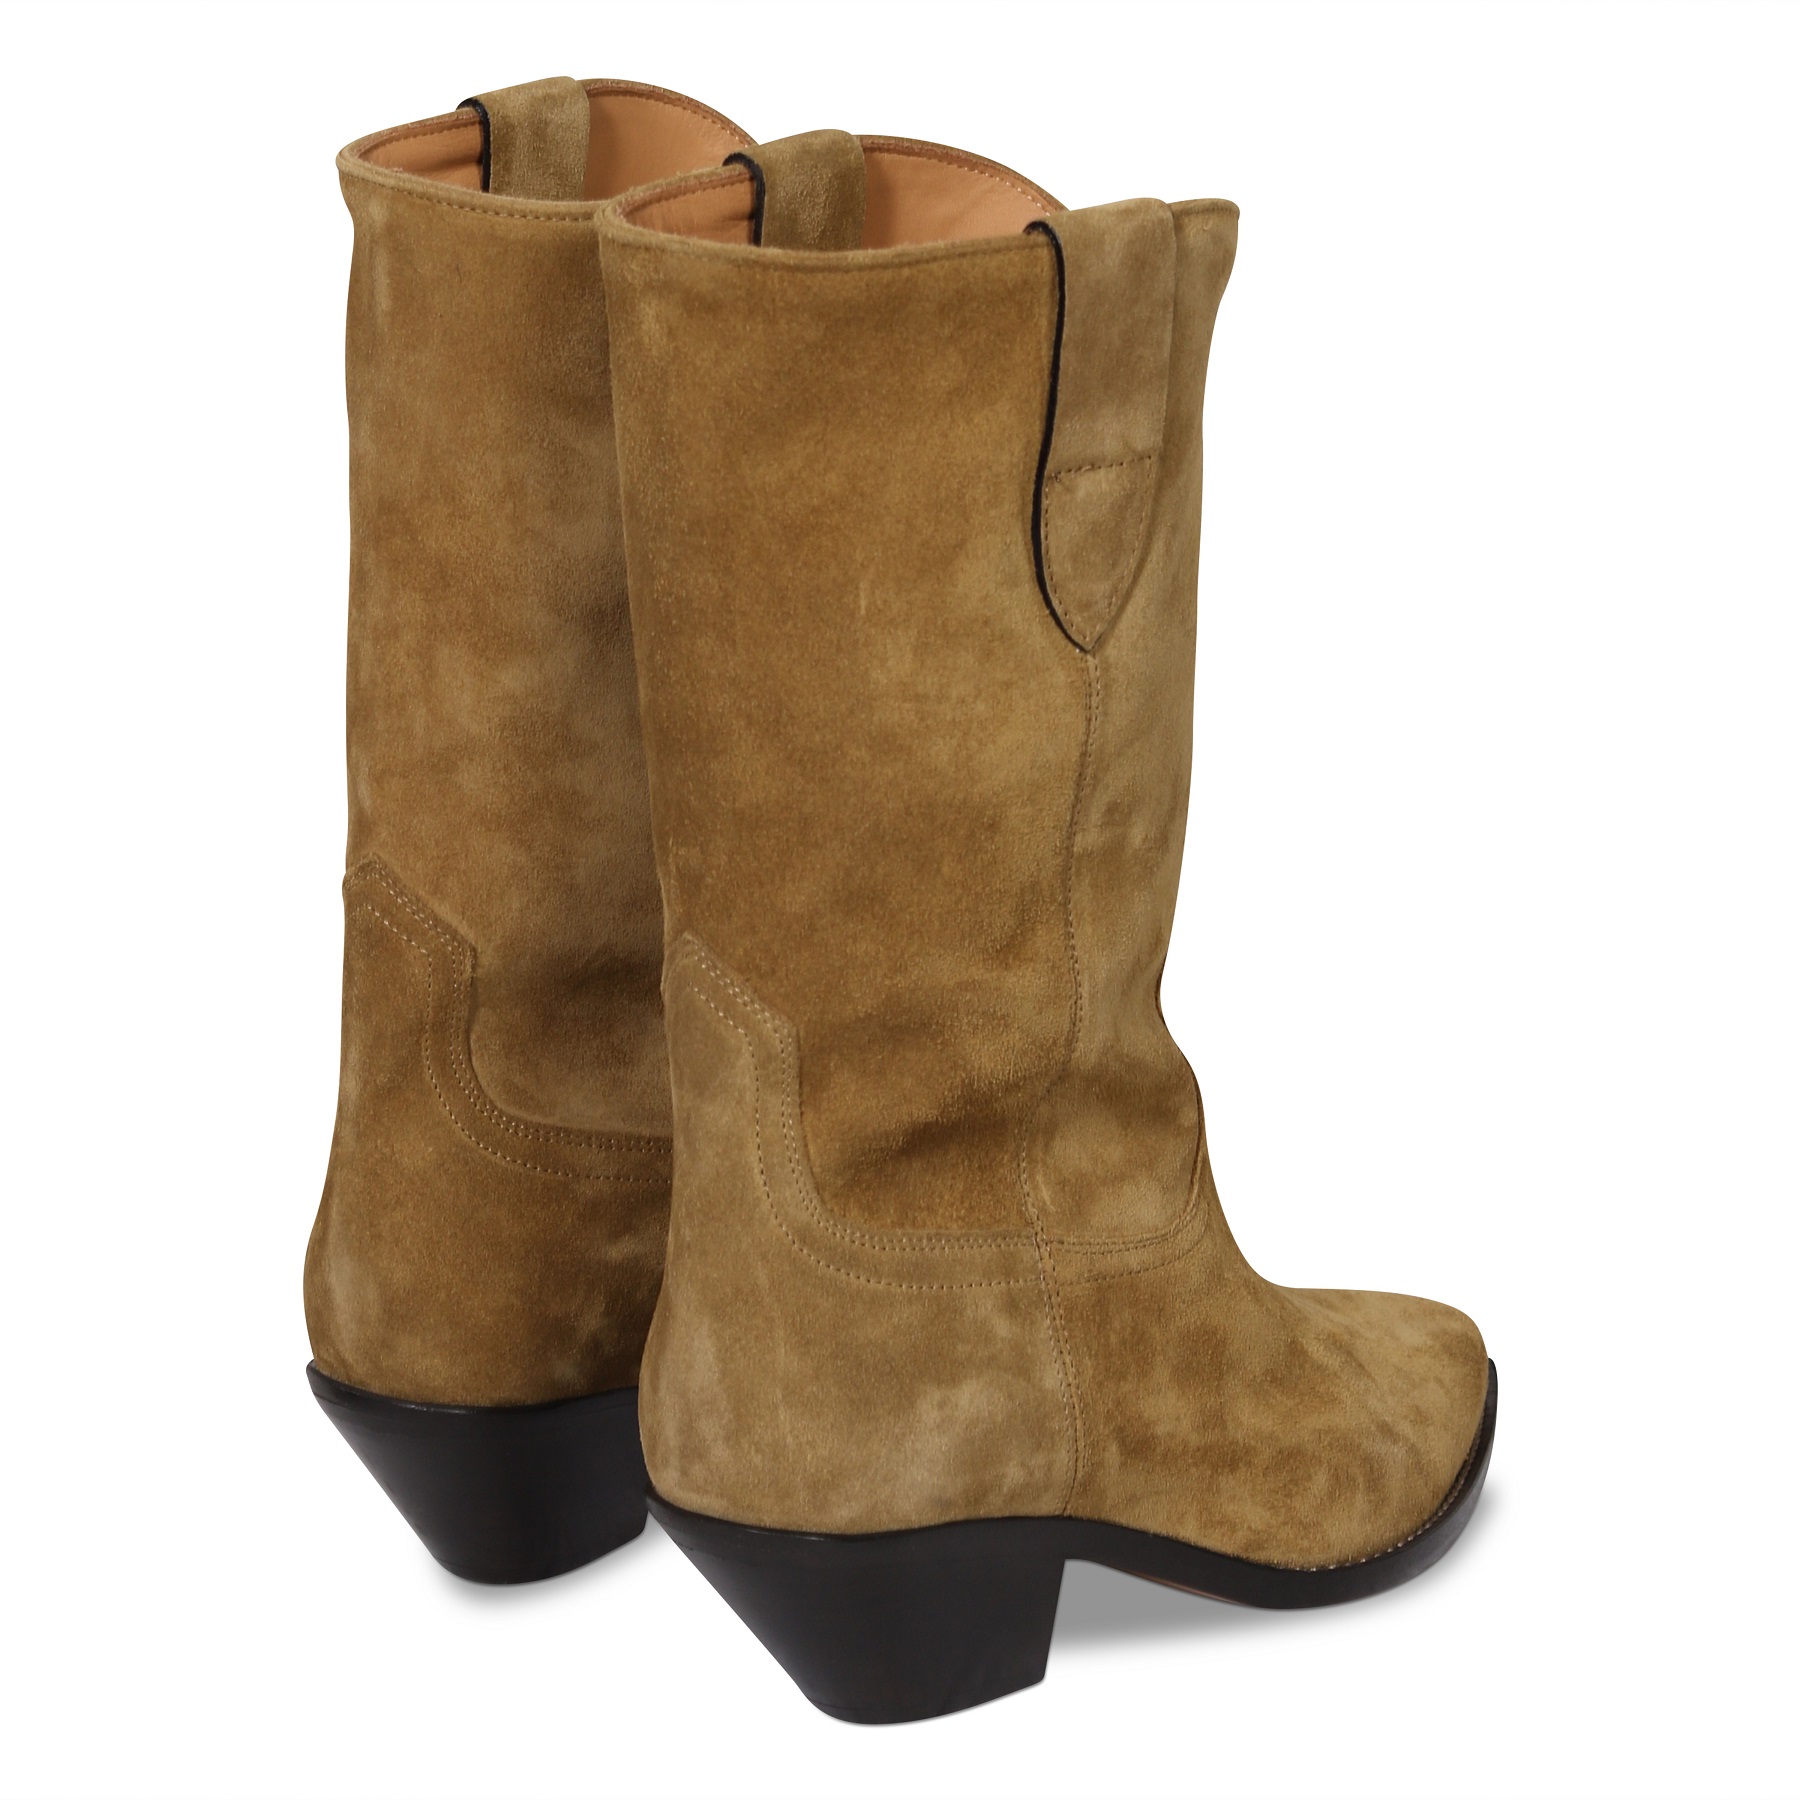 ISABEL MARANT Dahope Boots in Taupe 37